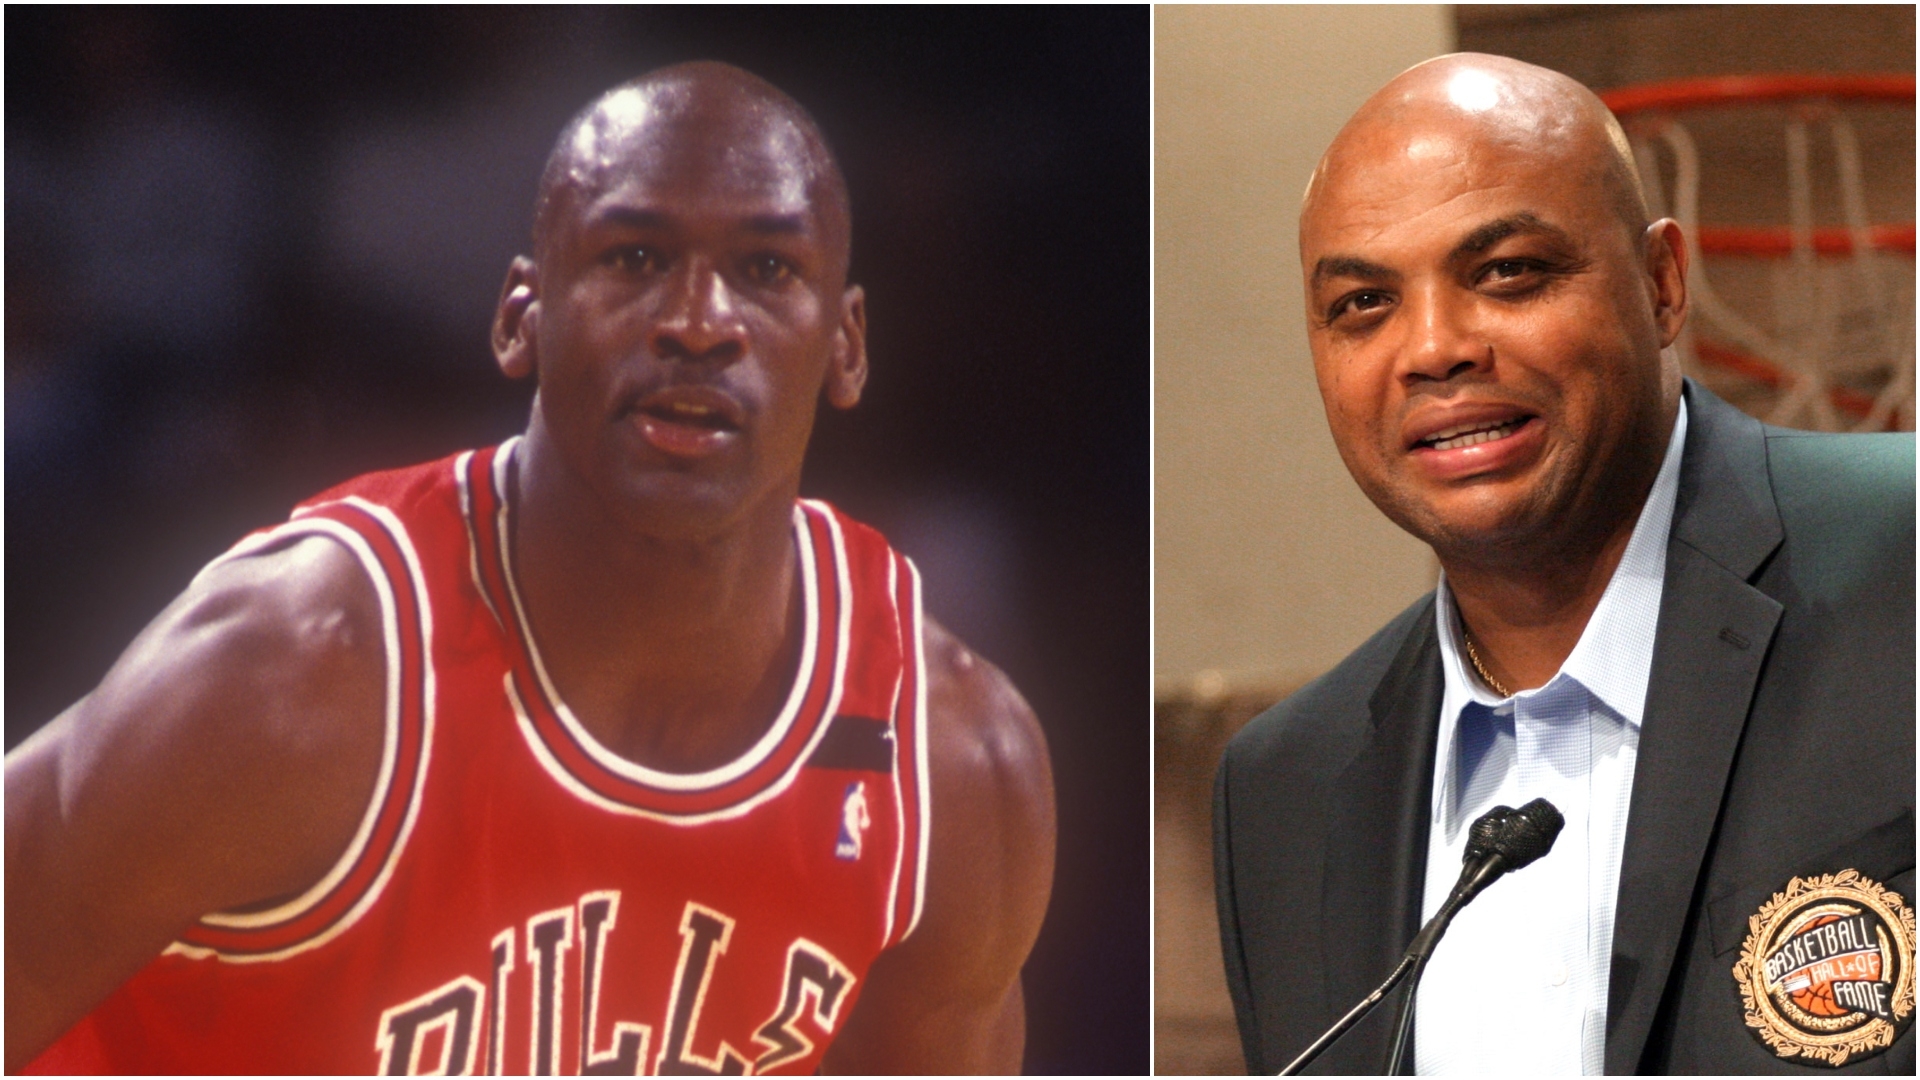 Barkley gives high praise to MJ for getting past Pistons